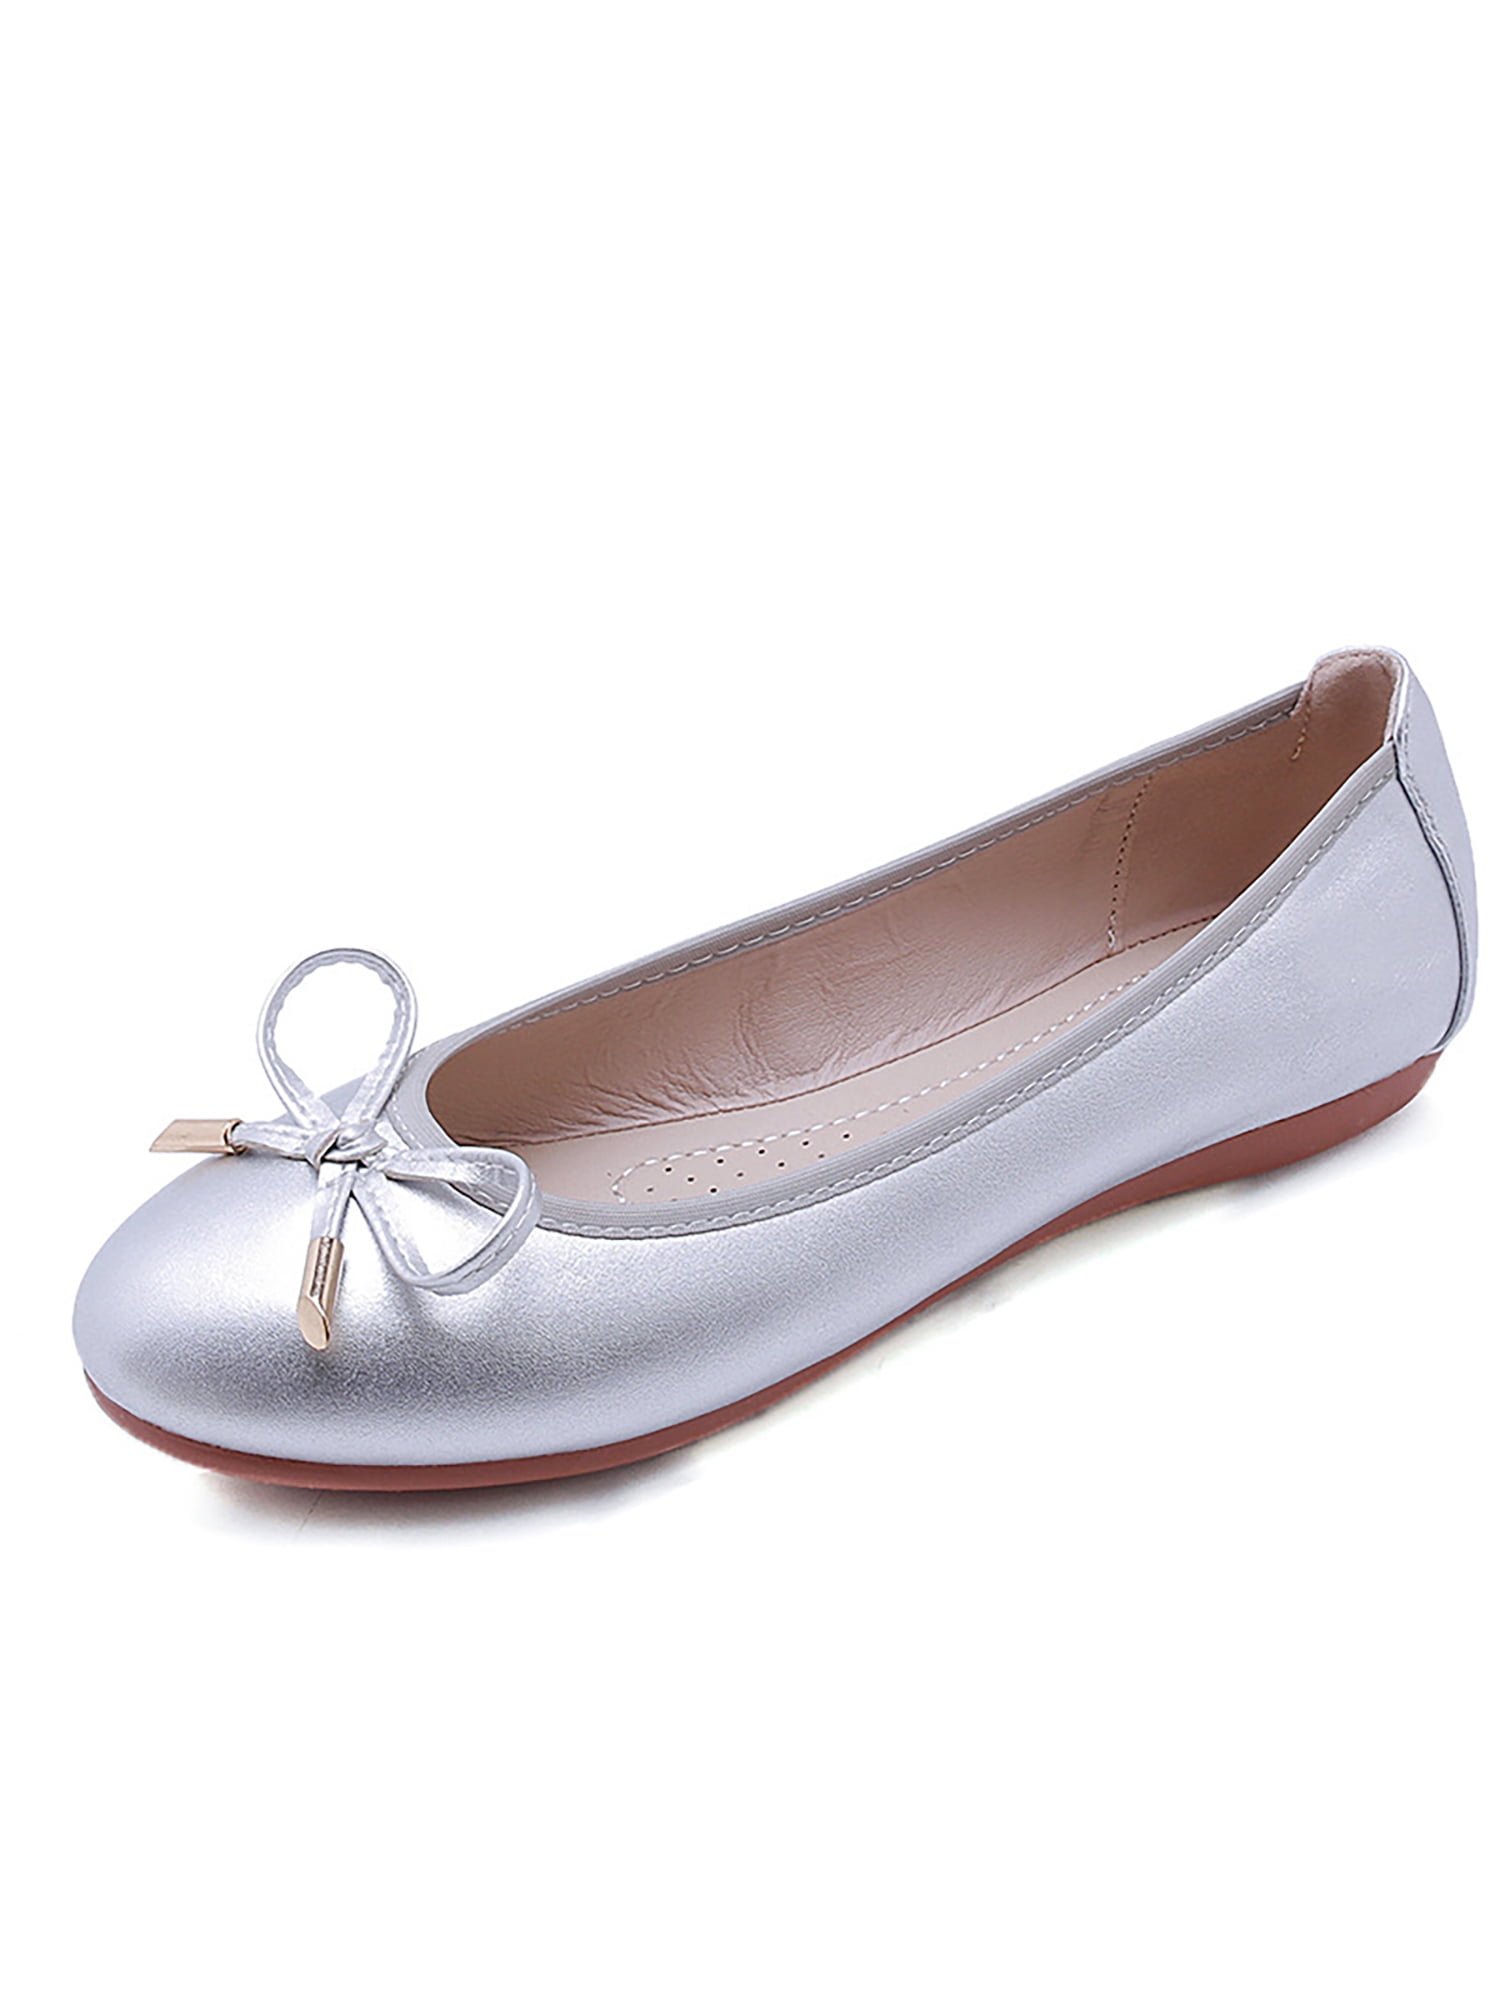 Details about   Women Ballerina Ballet Dolly Pumps Slip On Flat Boat Loafers Shoe Candy Color US